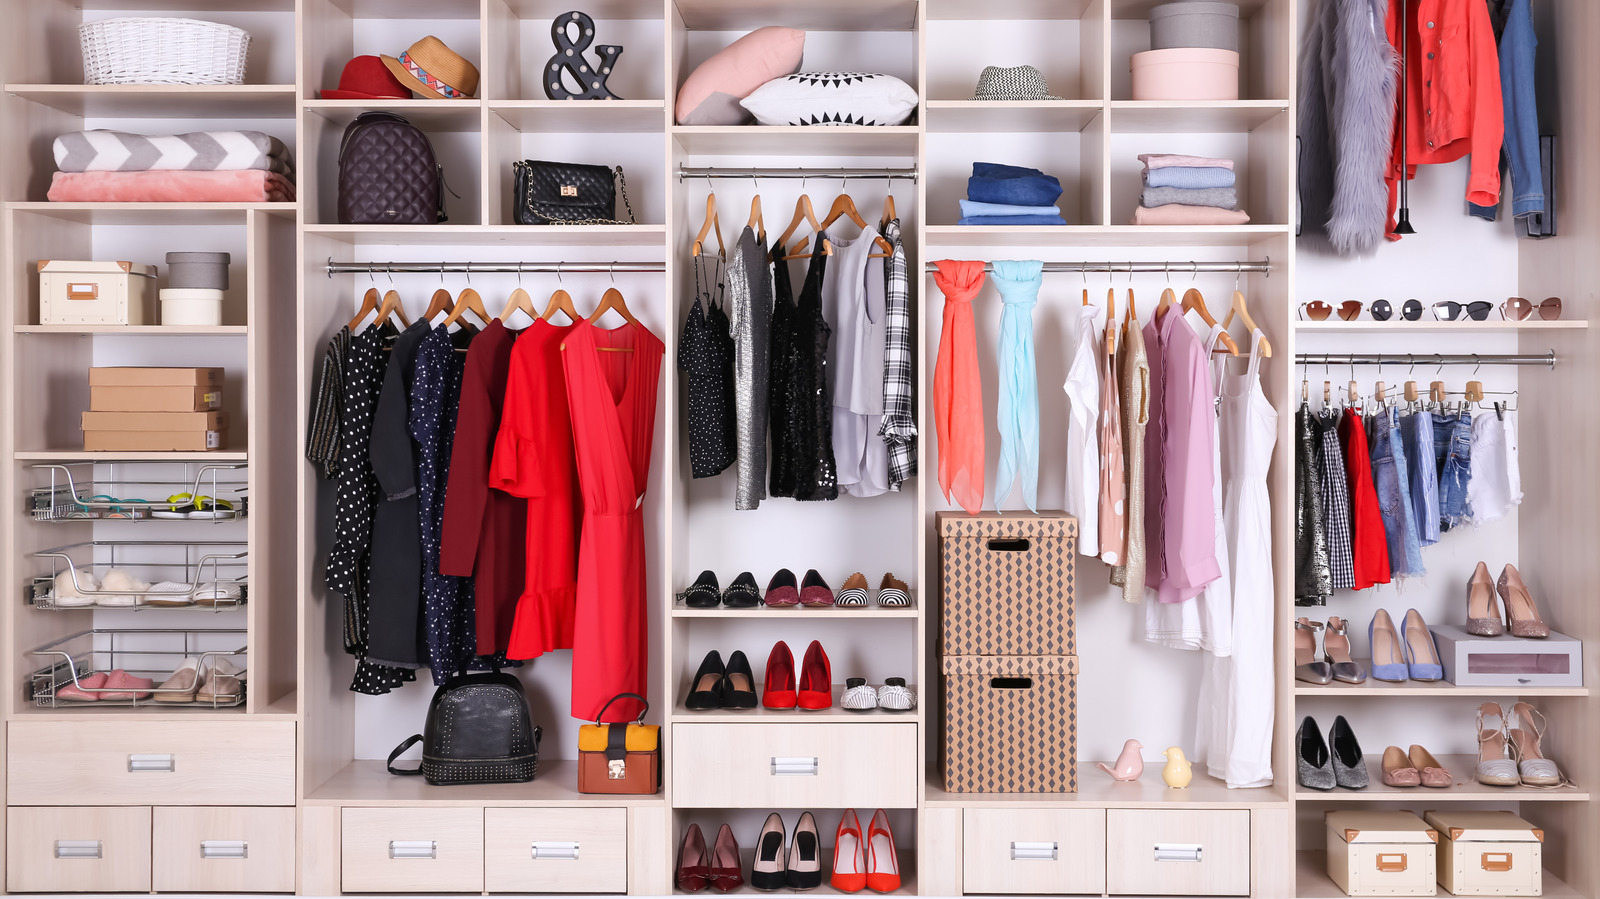 https://www.housedigest.com/img/gallery/how-to-create-more-closet-storage-according-to-a-professional-organizer/l-intro-1667233348.jpg